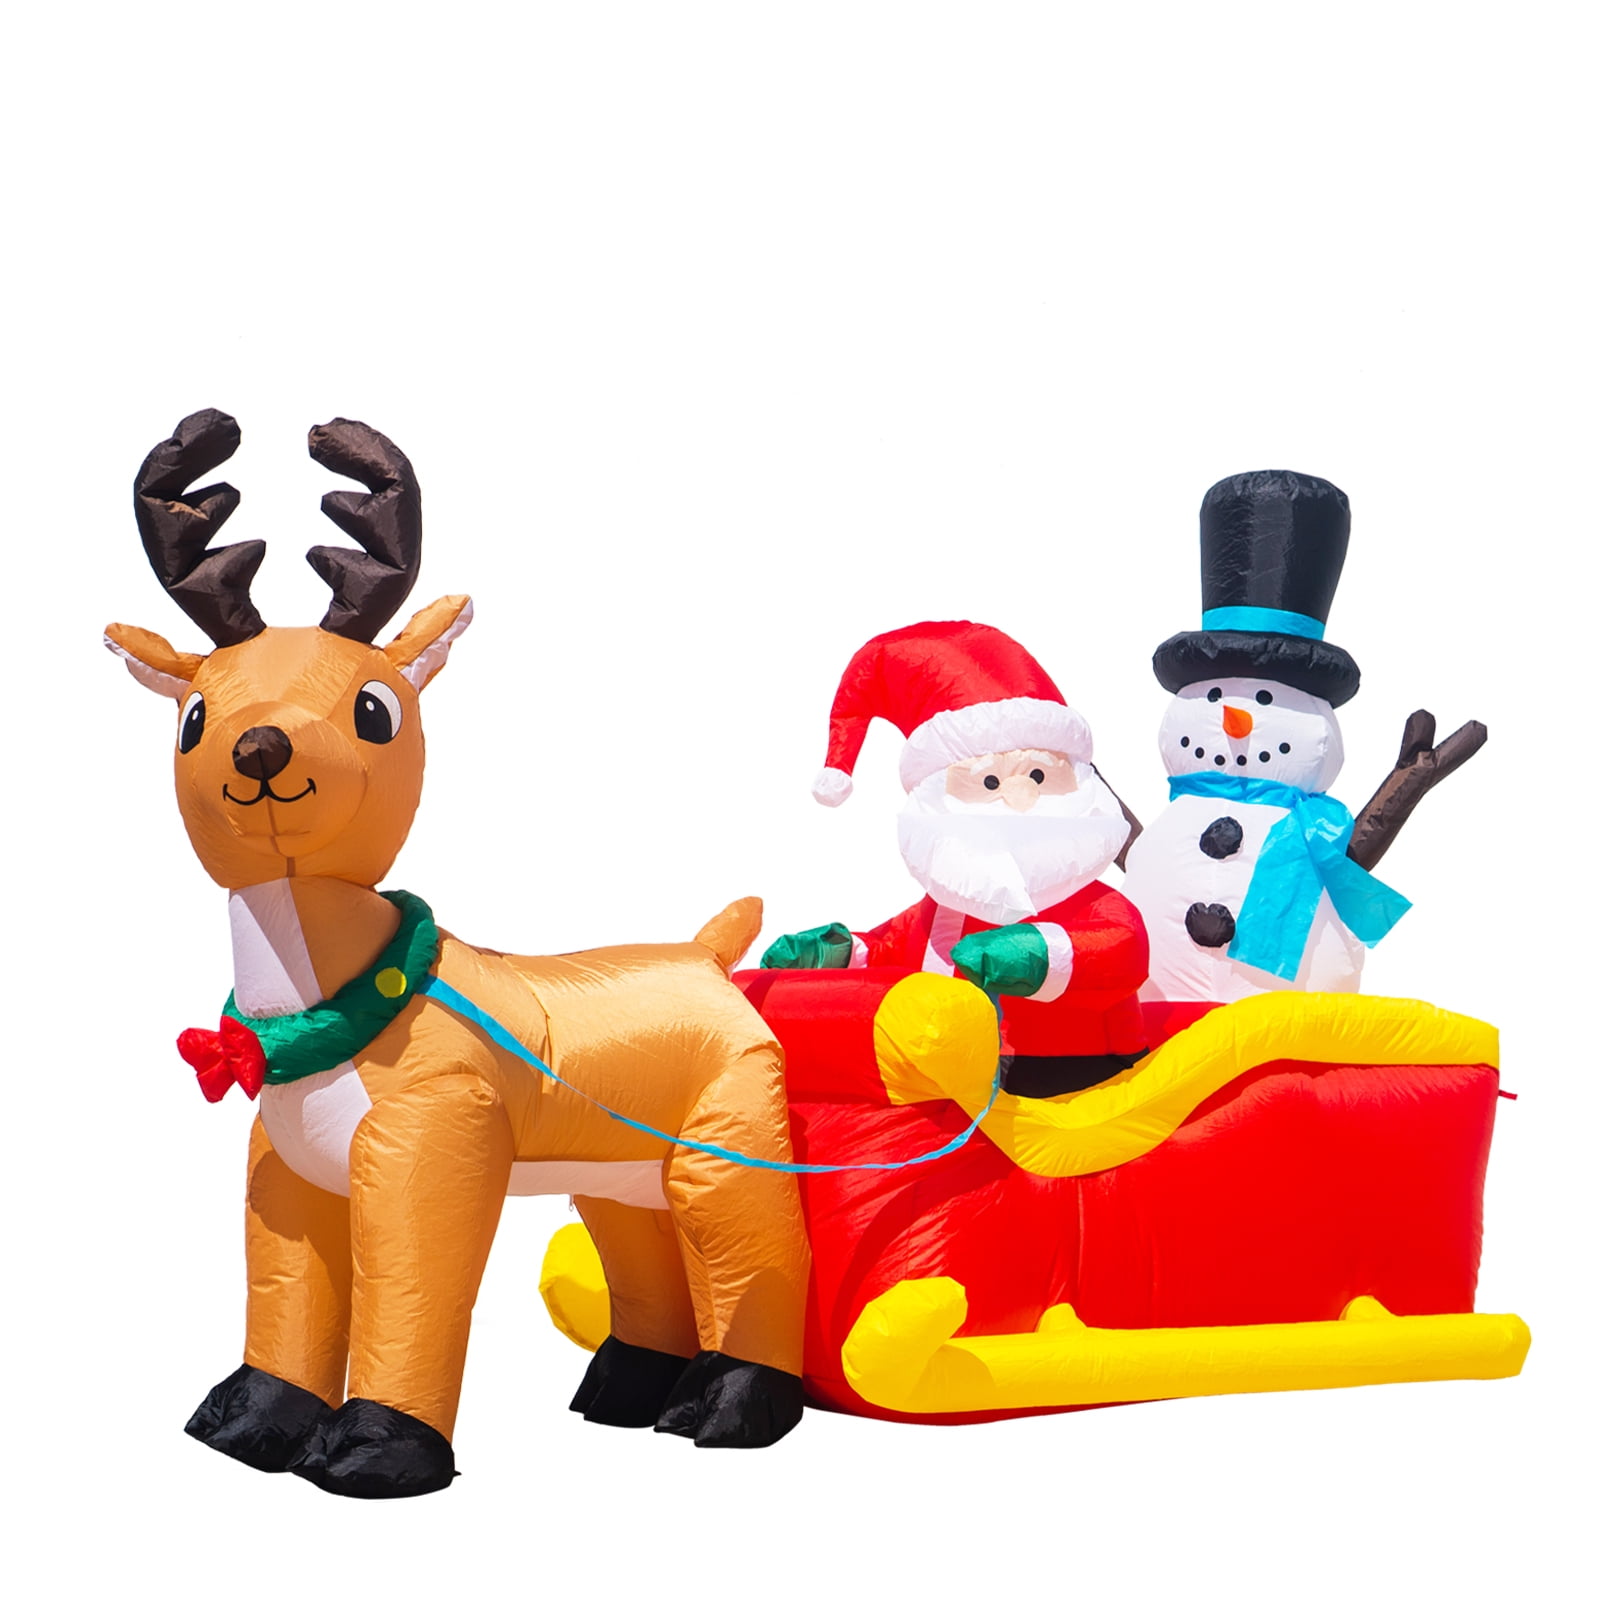 Details about   Christmas Inflatable Ride Deer Santa Claus Costume Props Décor for Party & Home 